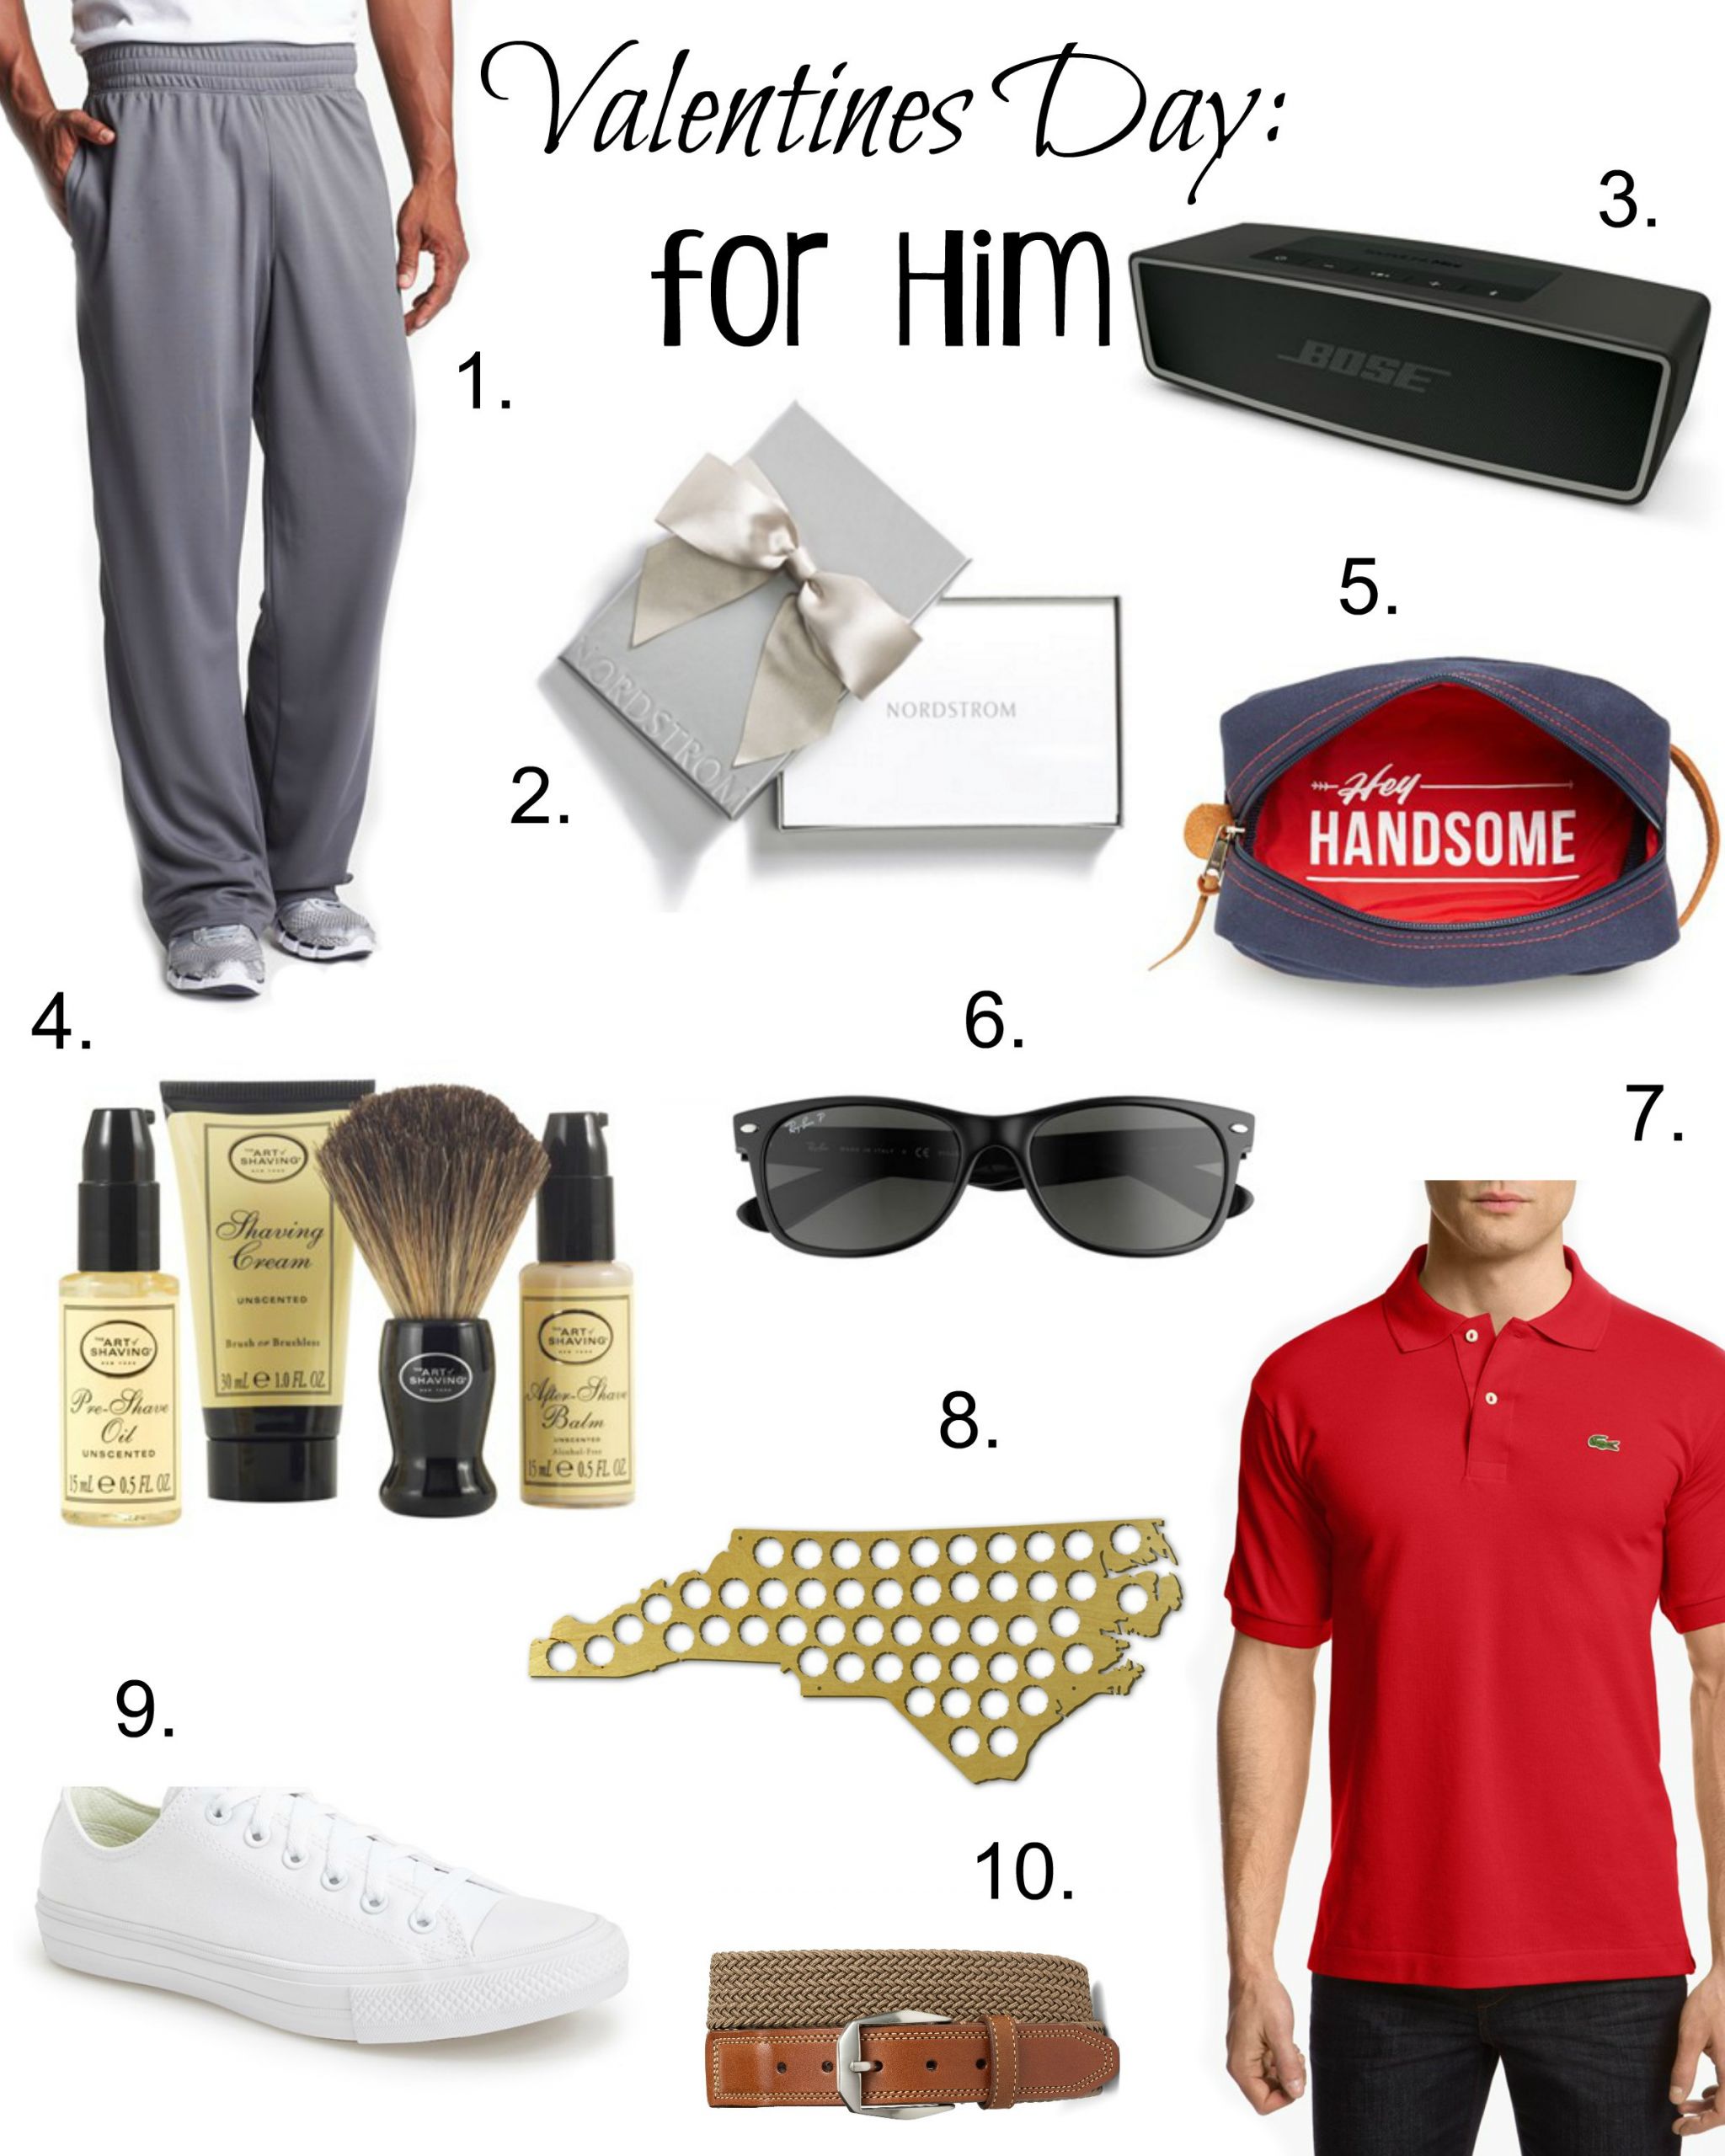 Top Valentines Day Gift
 Top 10 Valentines Day Gifts For Him